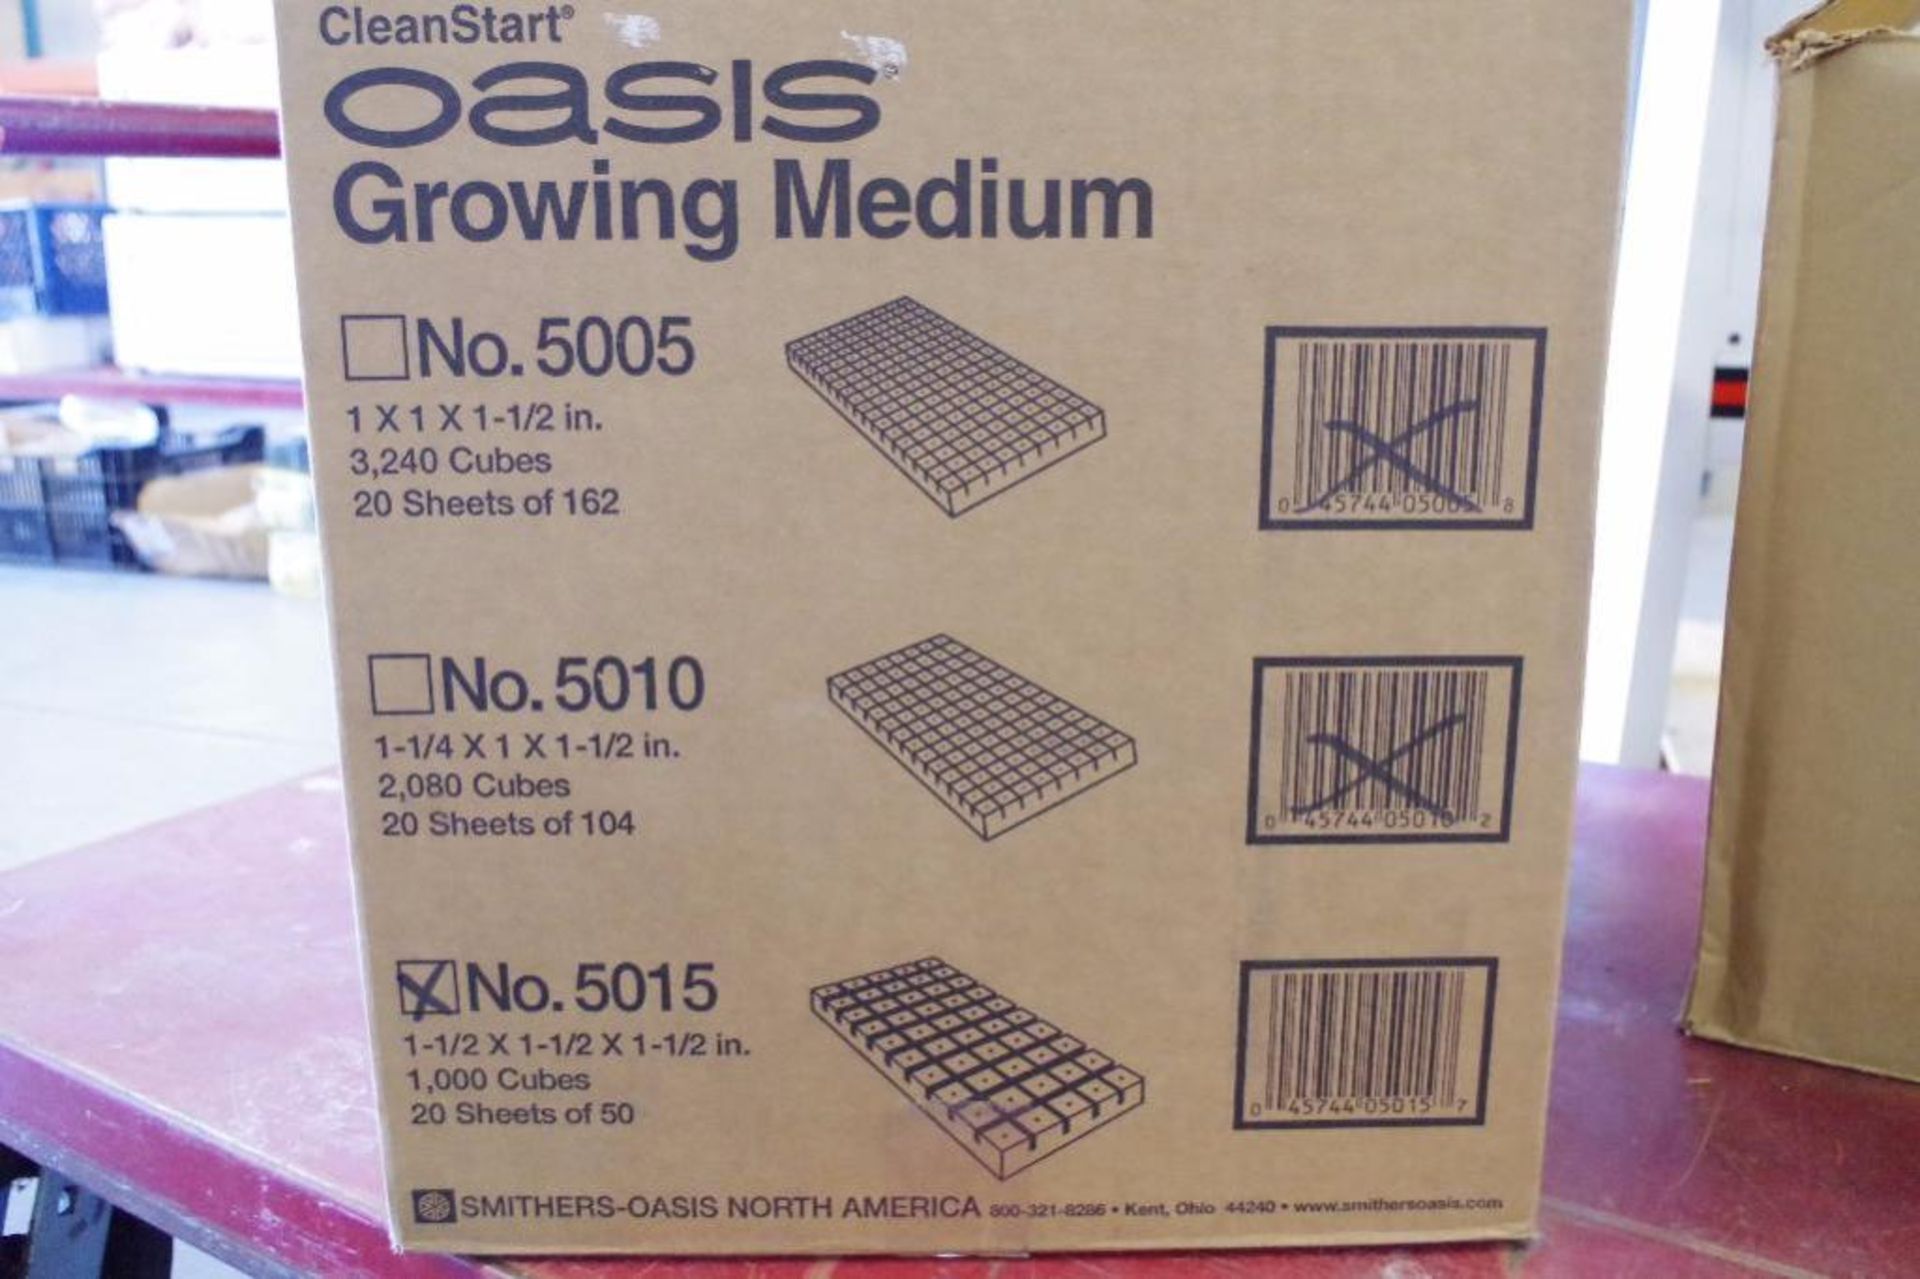 [1000] Cubes of OASIS Growing Medium, 1-1/2"x1-1/2"x1-1/2" (1 Case of 20 Sheets of 50 Each) - Image 2 of 3